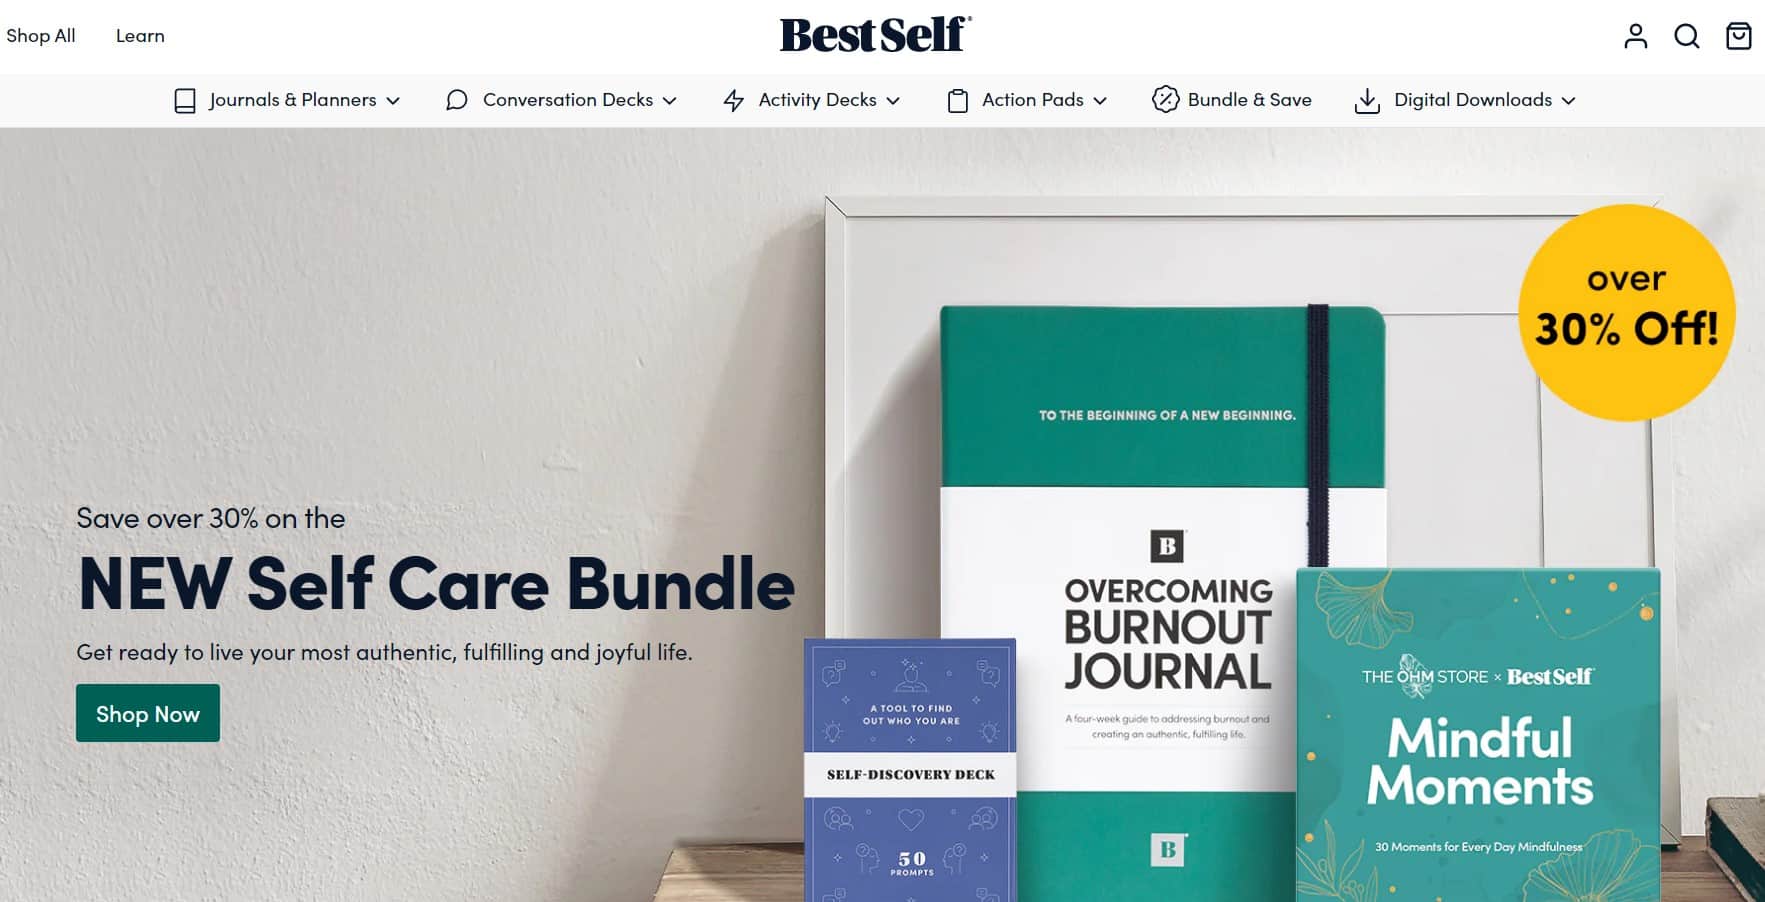 BestSelf Home Page